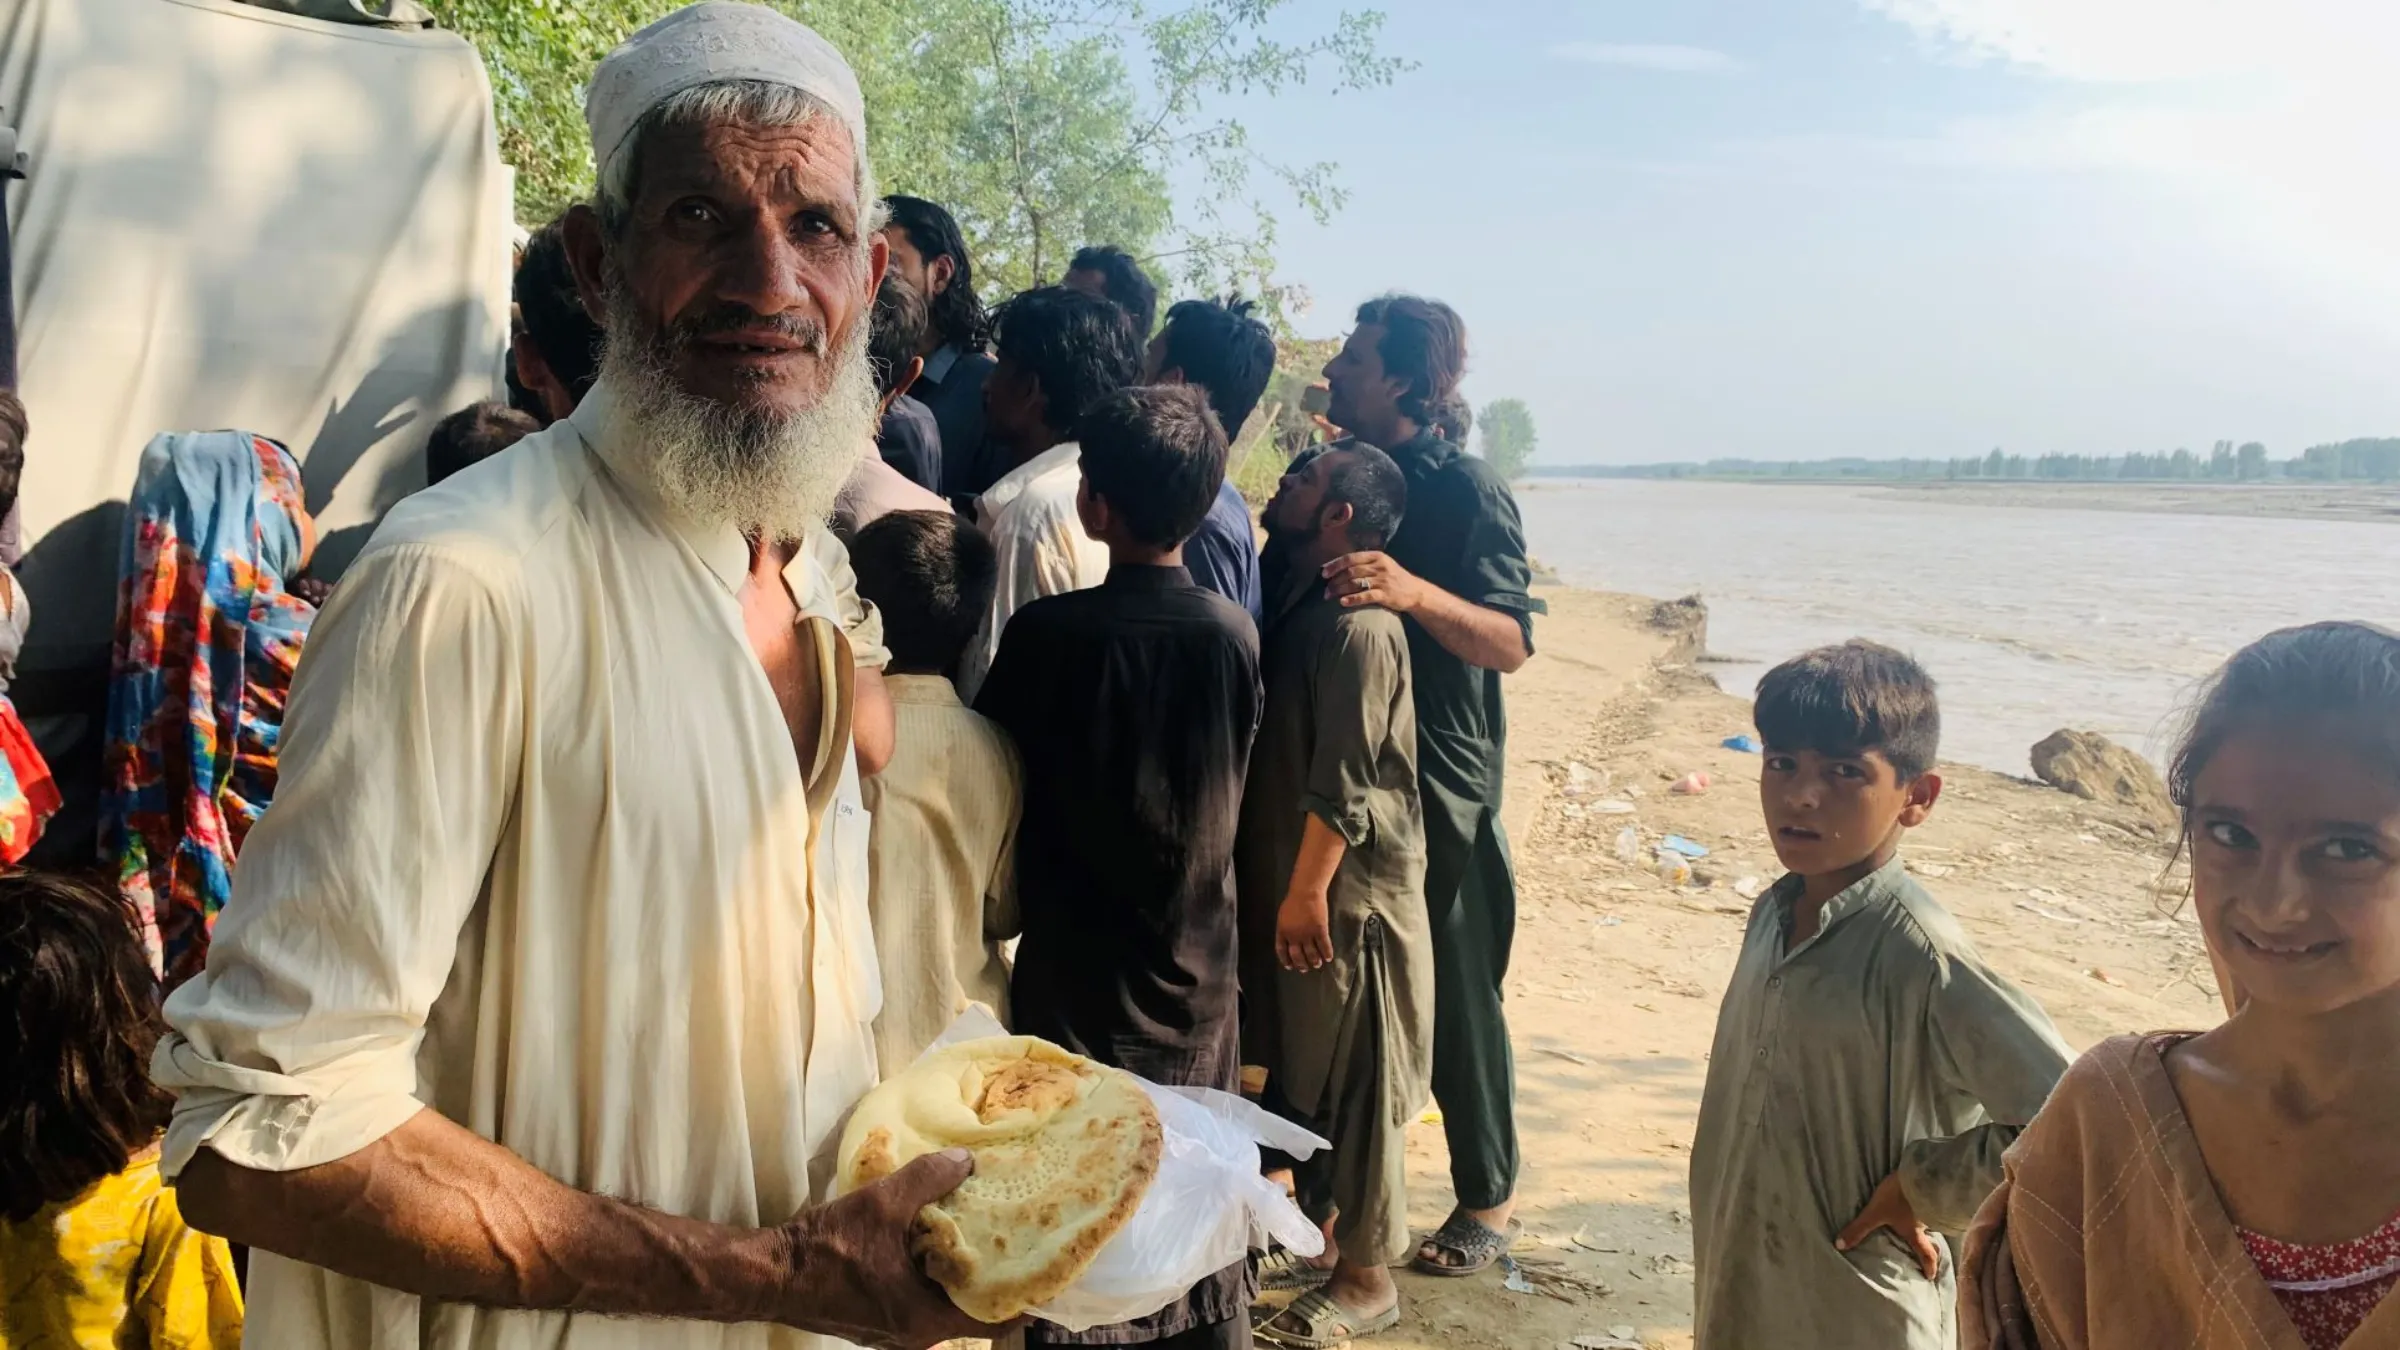 A flood-affected older man gets free food provided by a local philanthropist on the banks of the Swat River in Dagi Mukarram Khan, a village in Charsadda district in Pakistan’s northwest Khyber Pakhtunkhwa province, September 1, 2022. Thomson Reuters Foundations/Imran Mukhtar